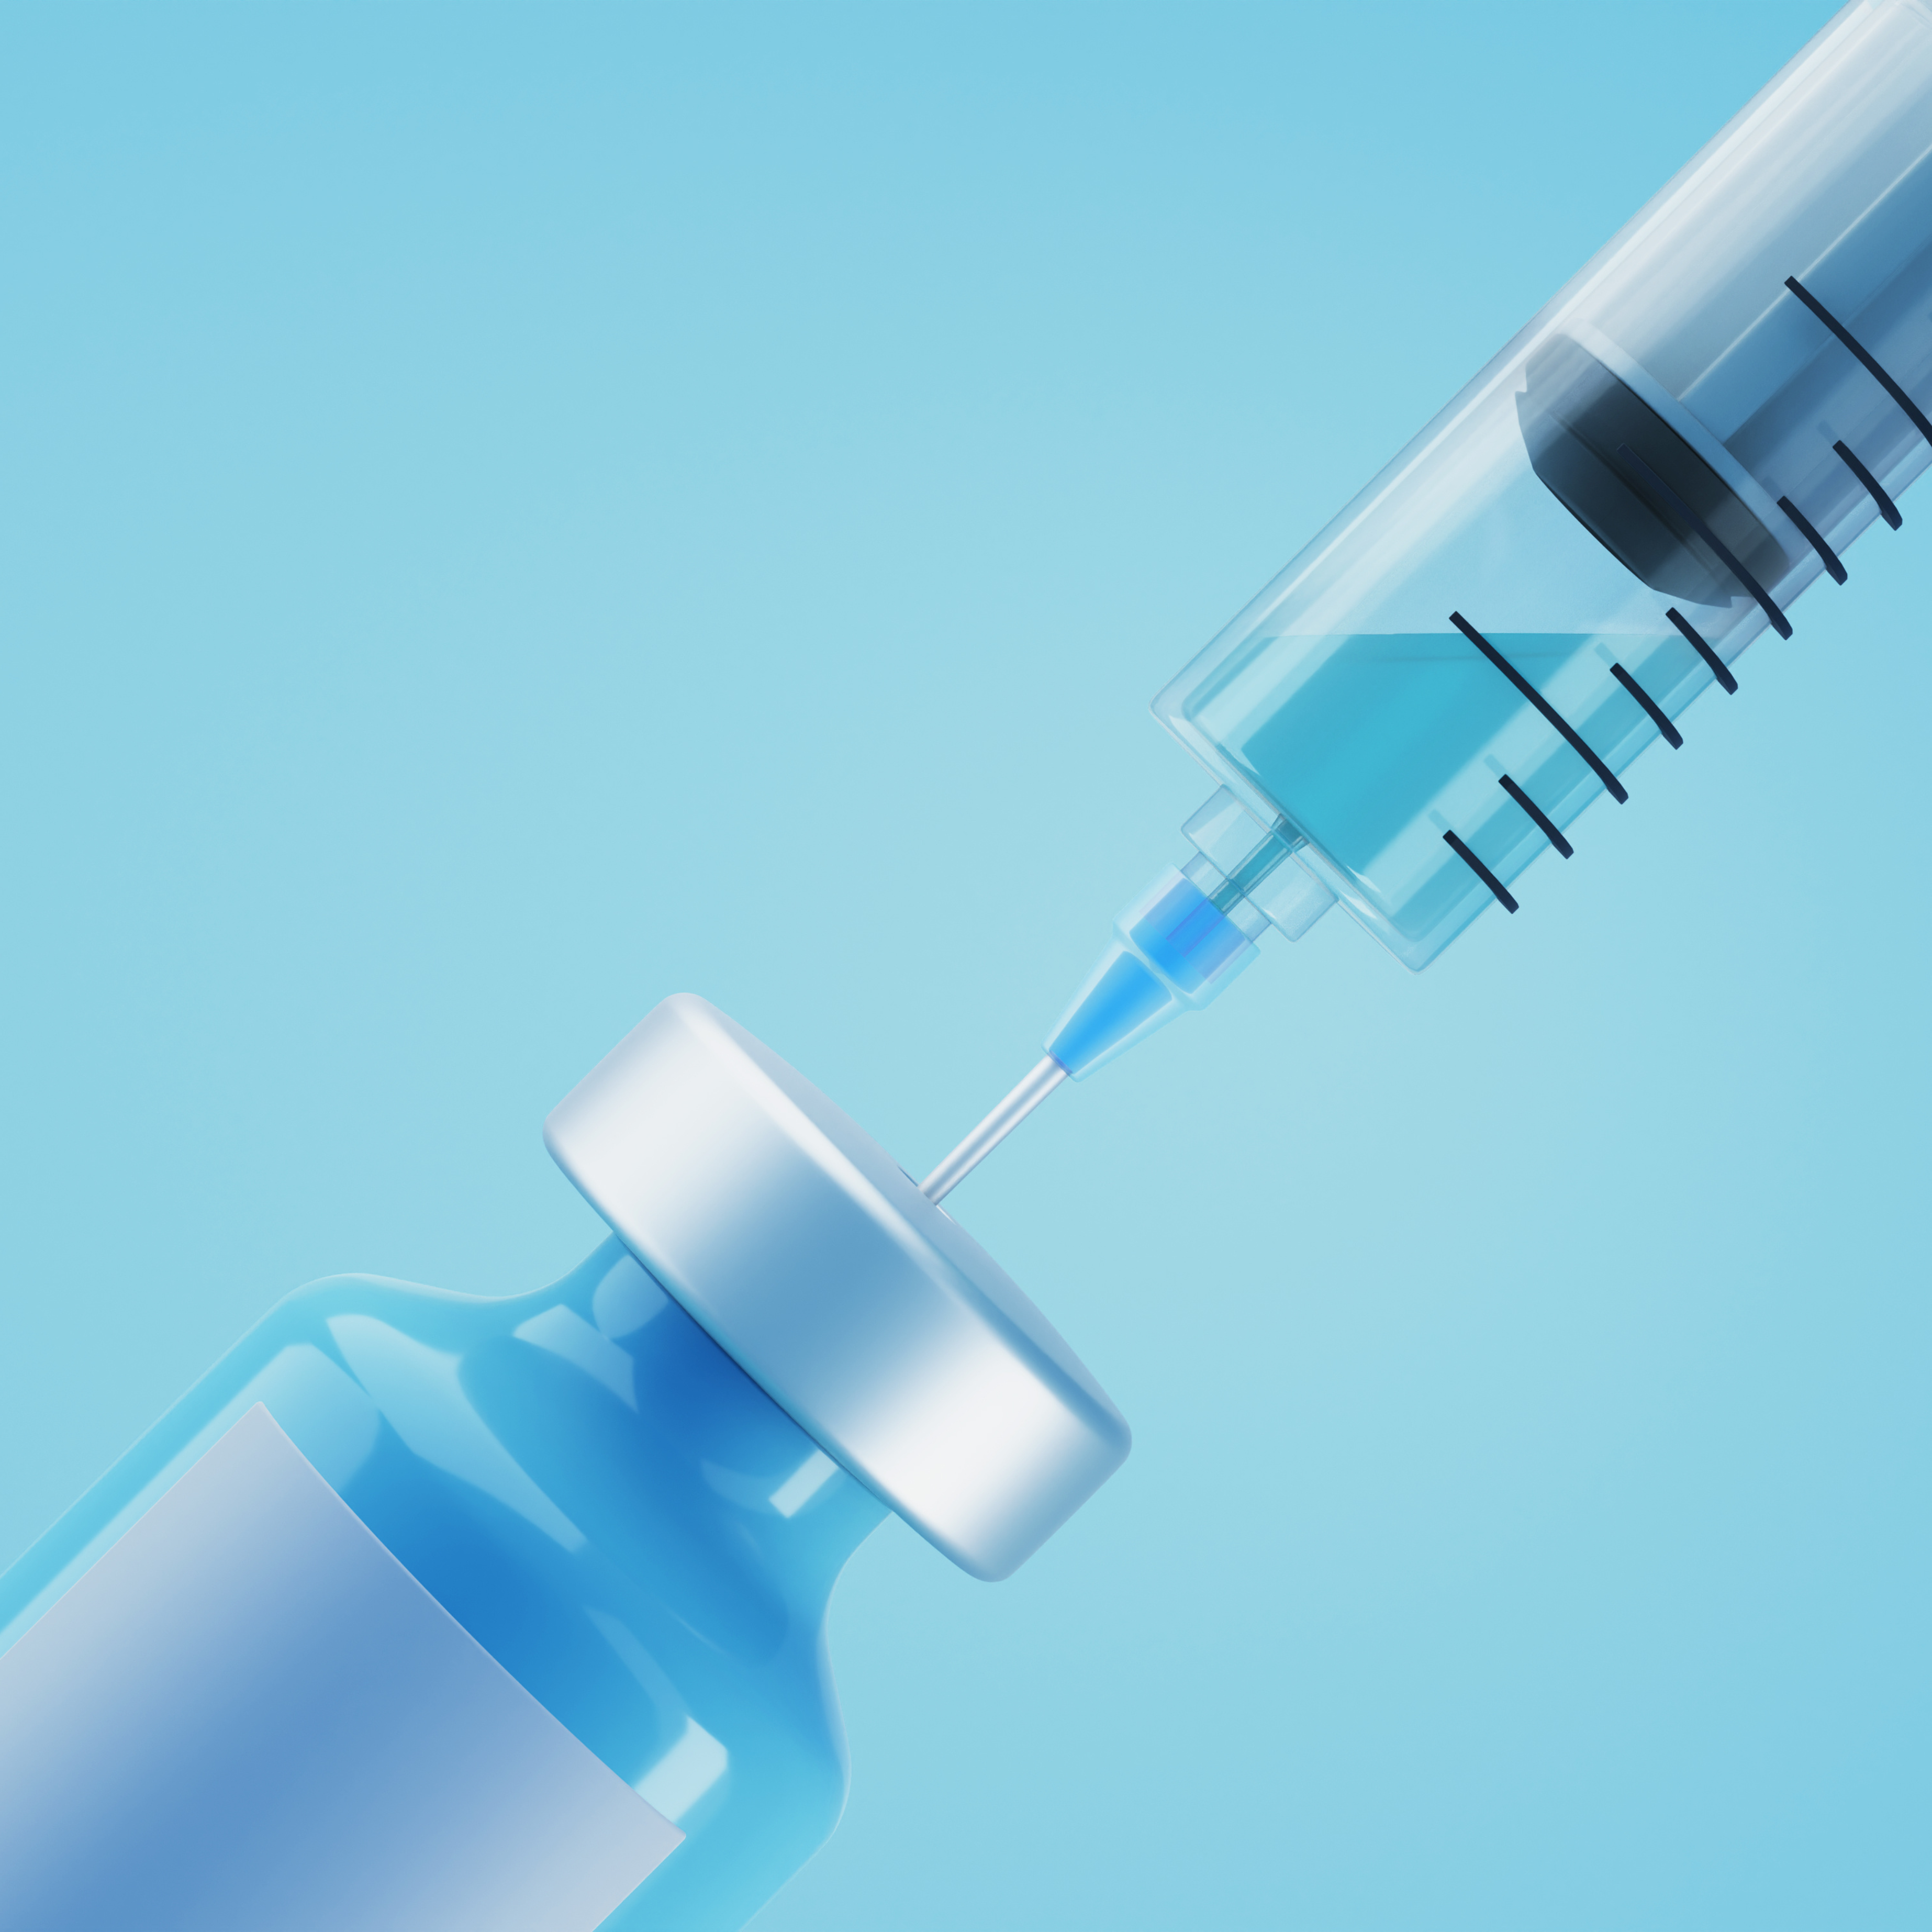 3d rendering of a medical syringe with the needle in the septum of a glass vial